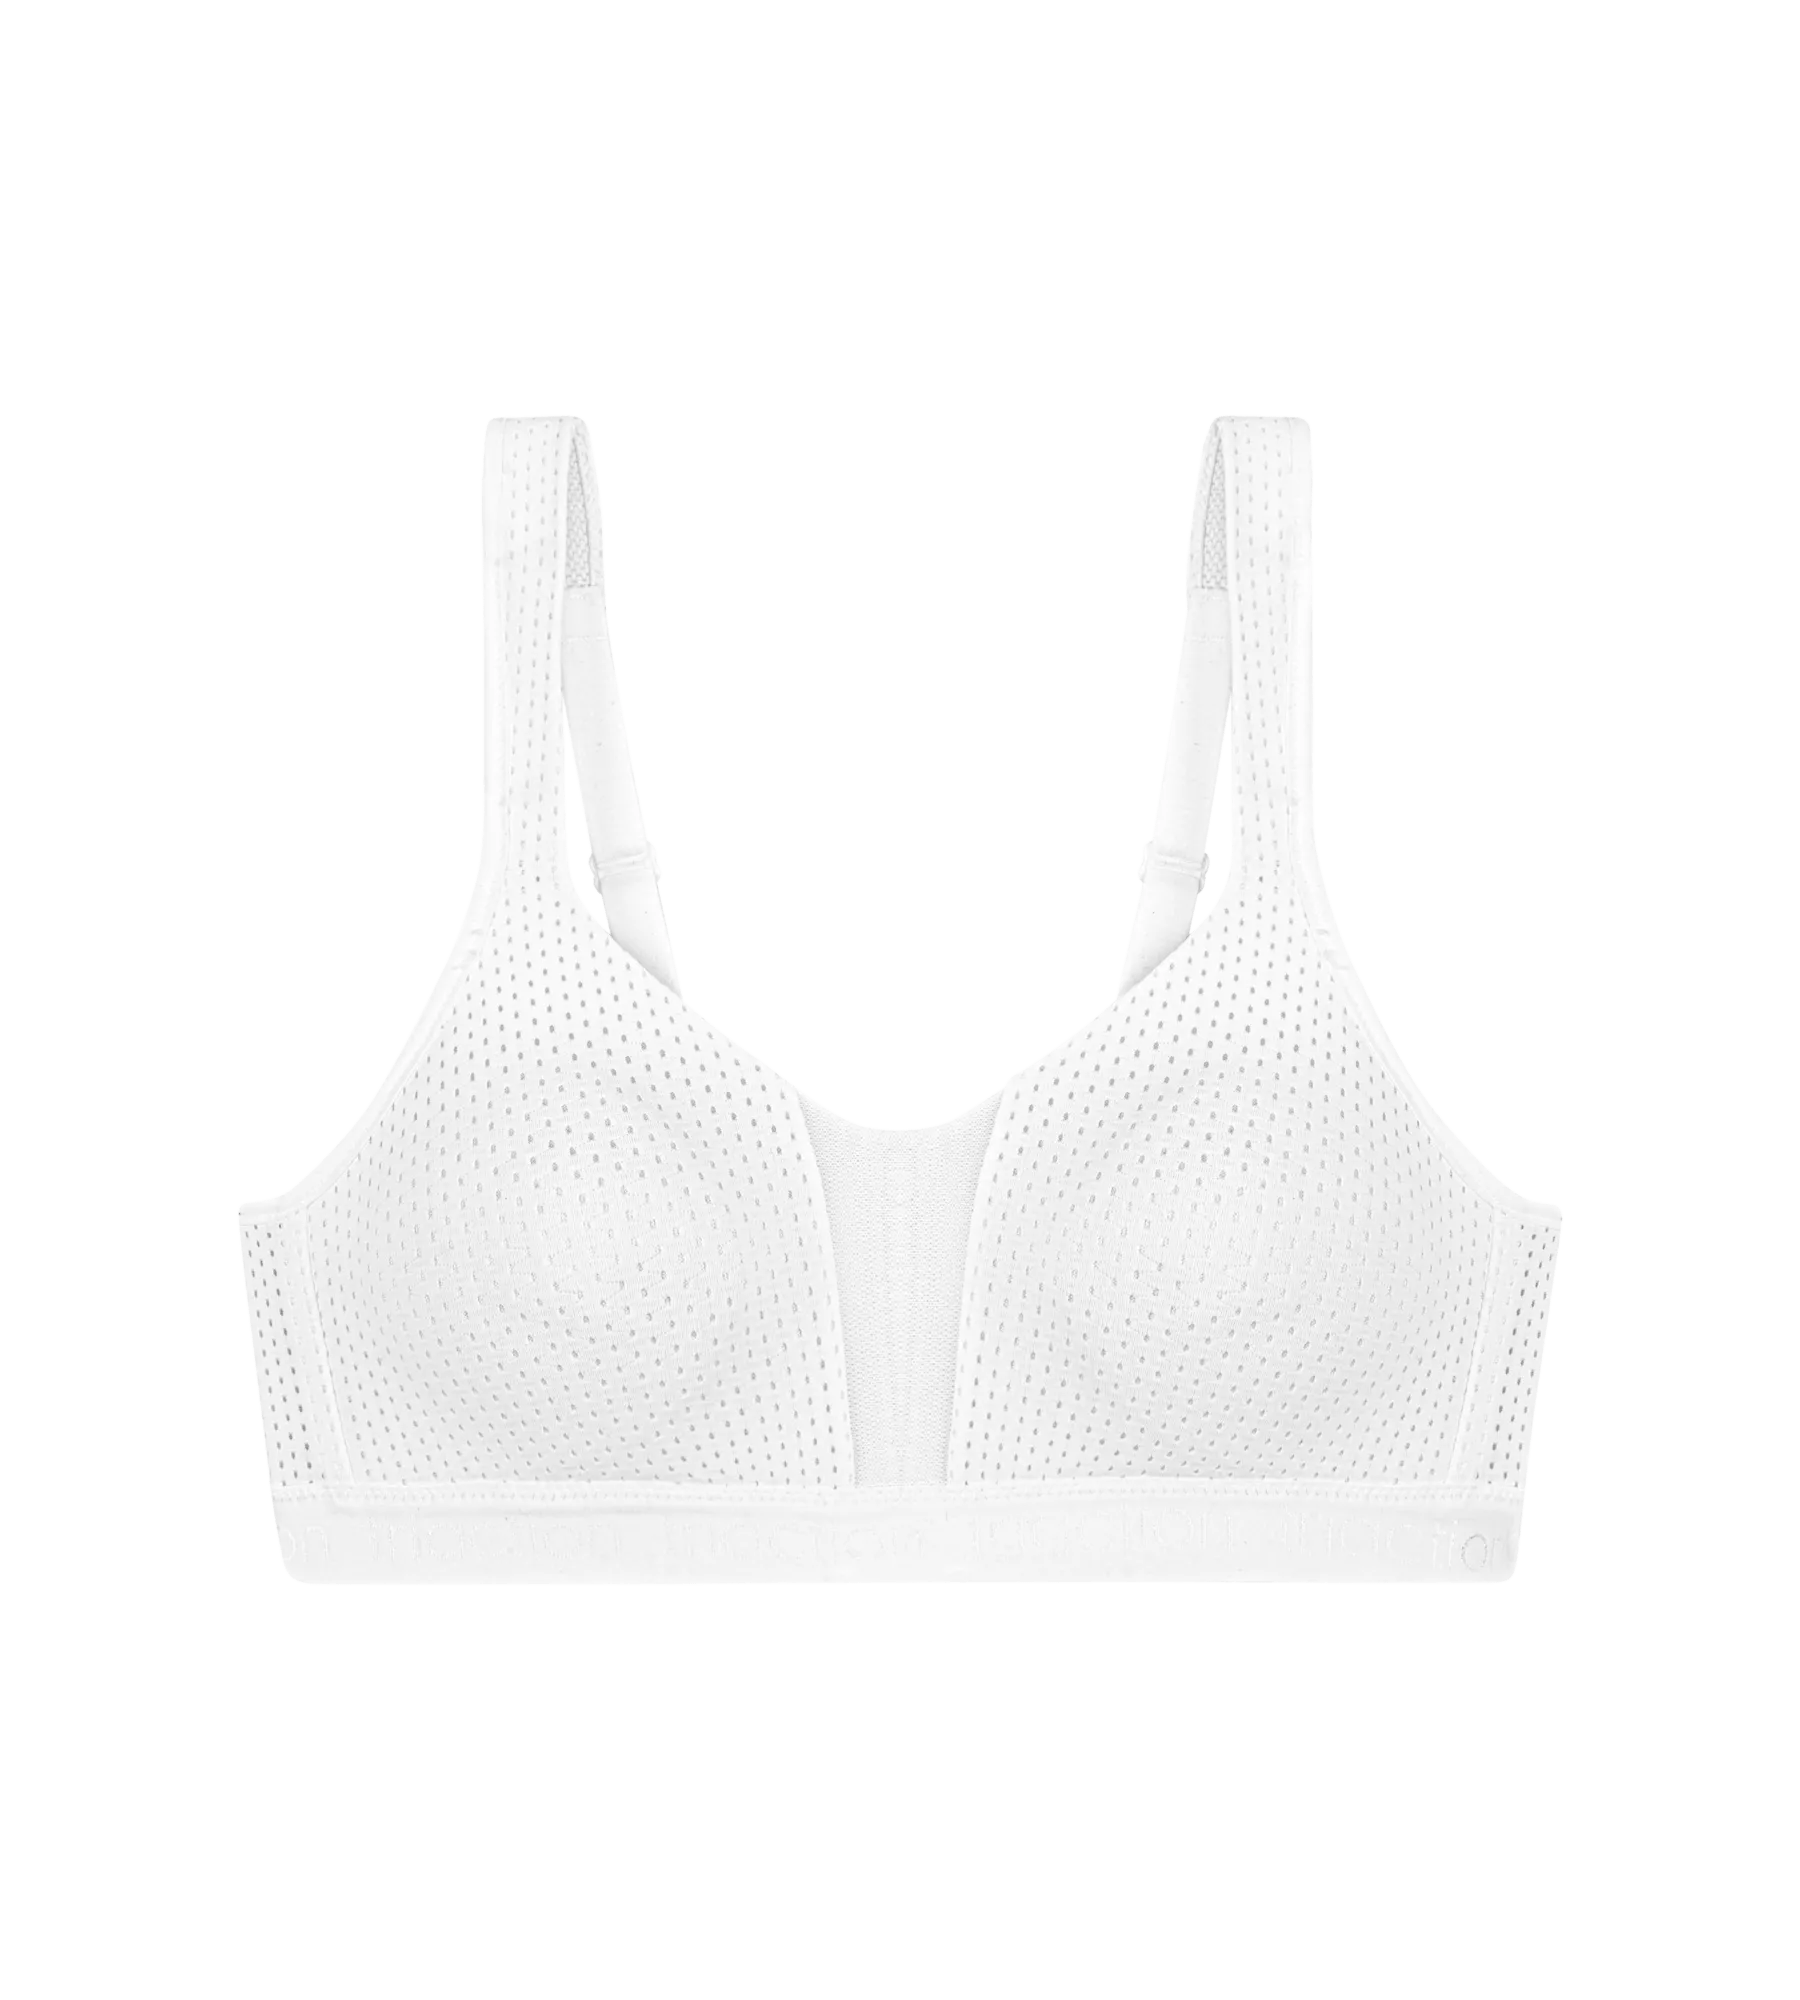 Buy Triumph Triaction Hybrid Lite Spacer Cup Padded Wireless Extreme Support  High Bounce Control Big-Cup Sports Bra - Black at Rs.2699 online